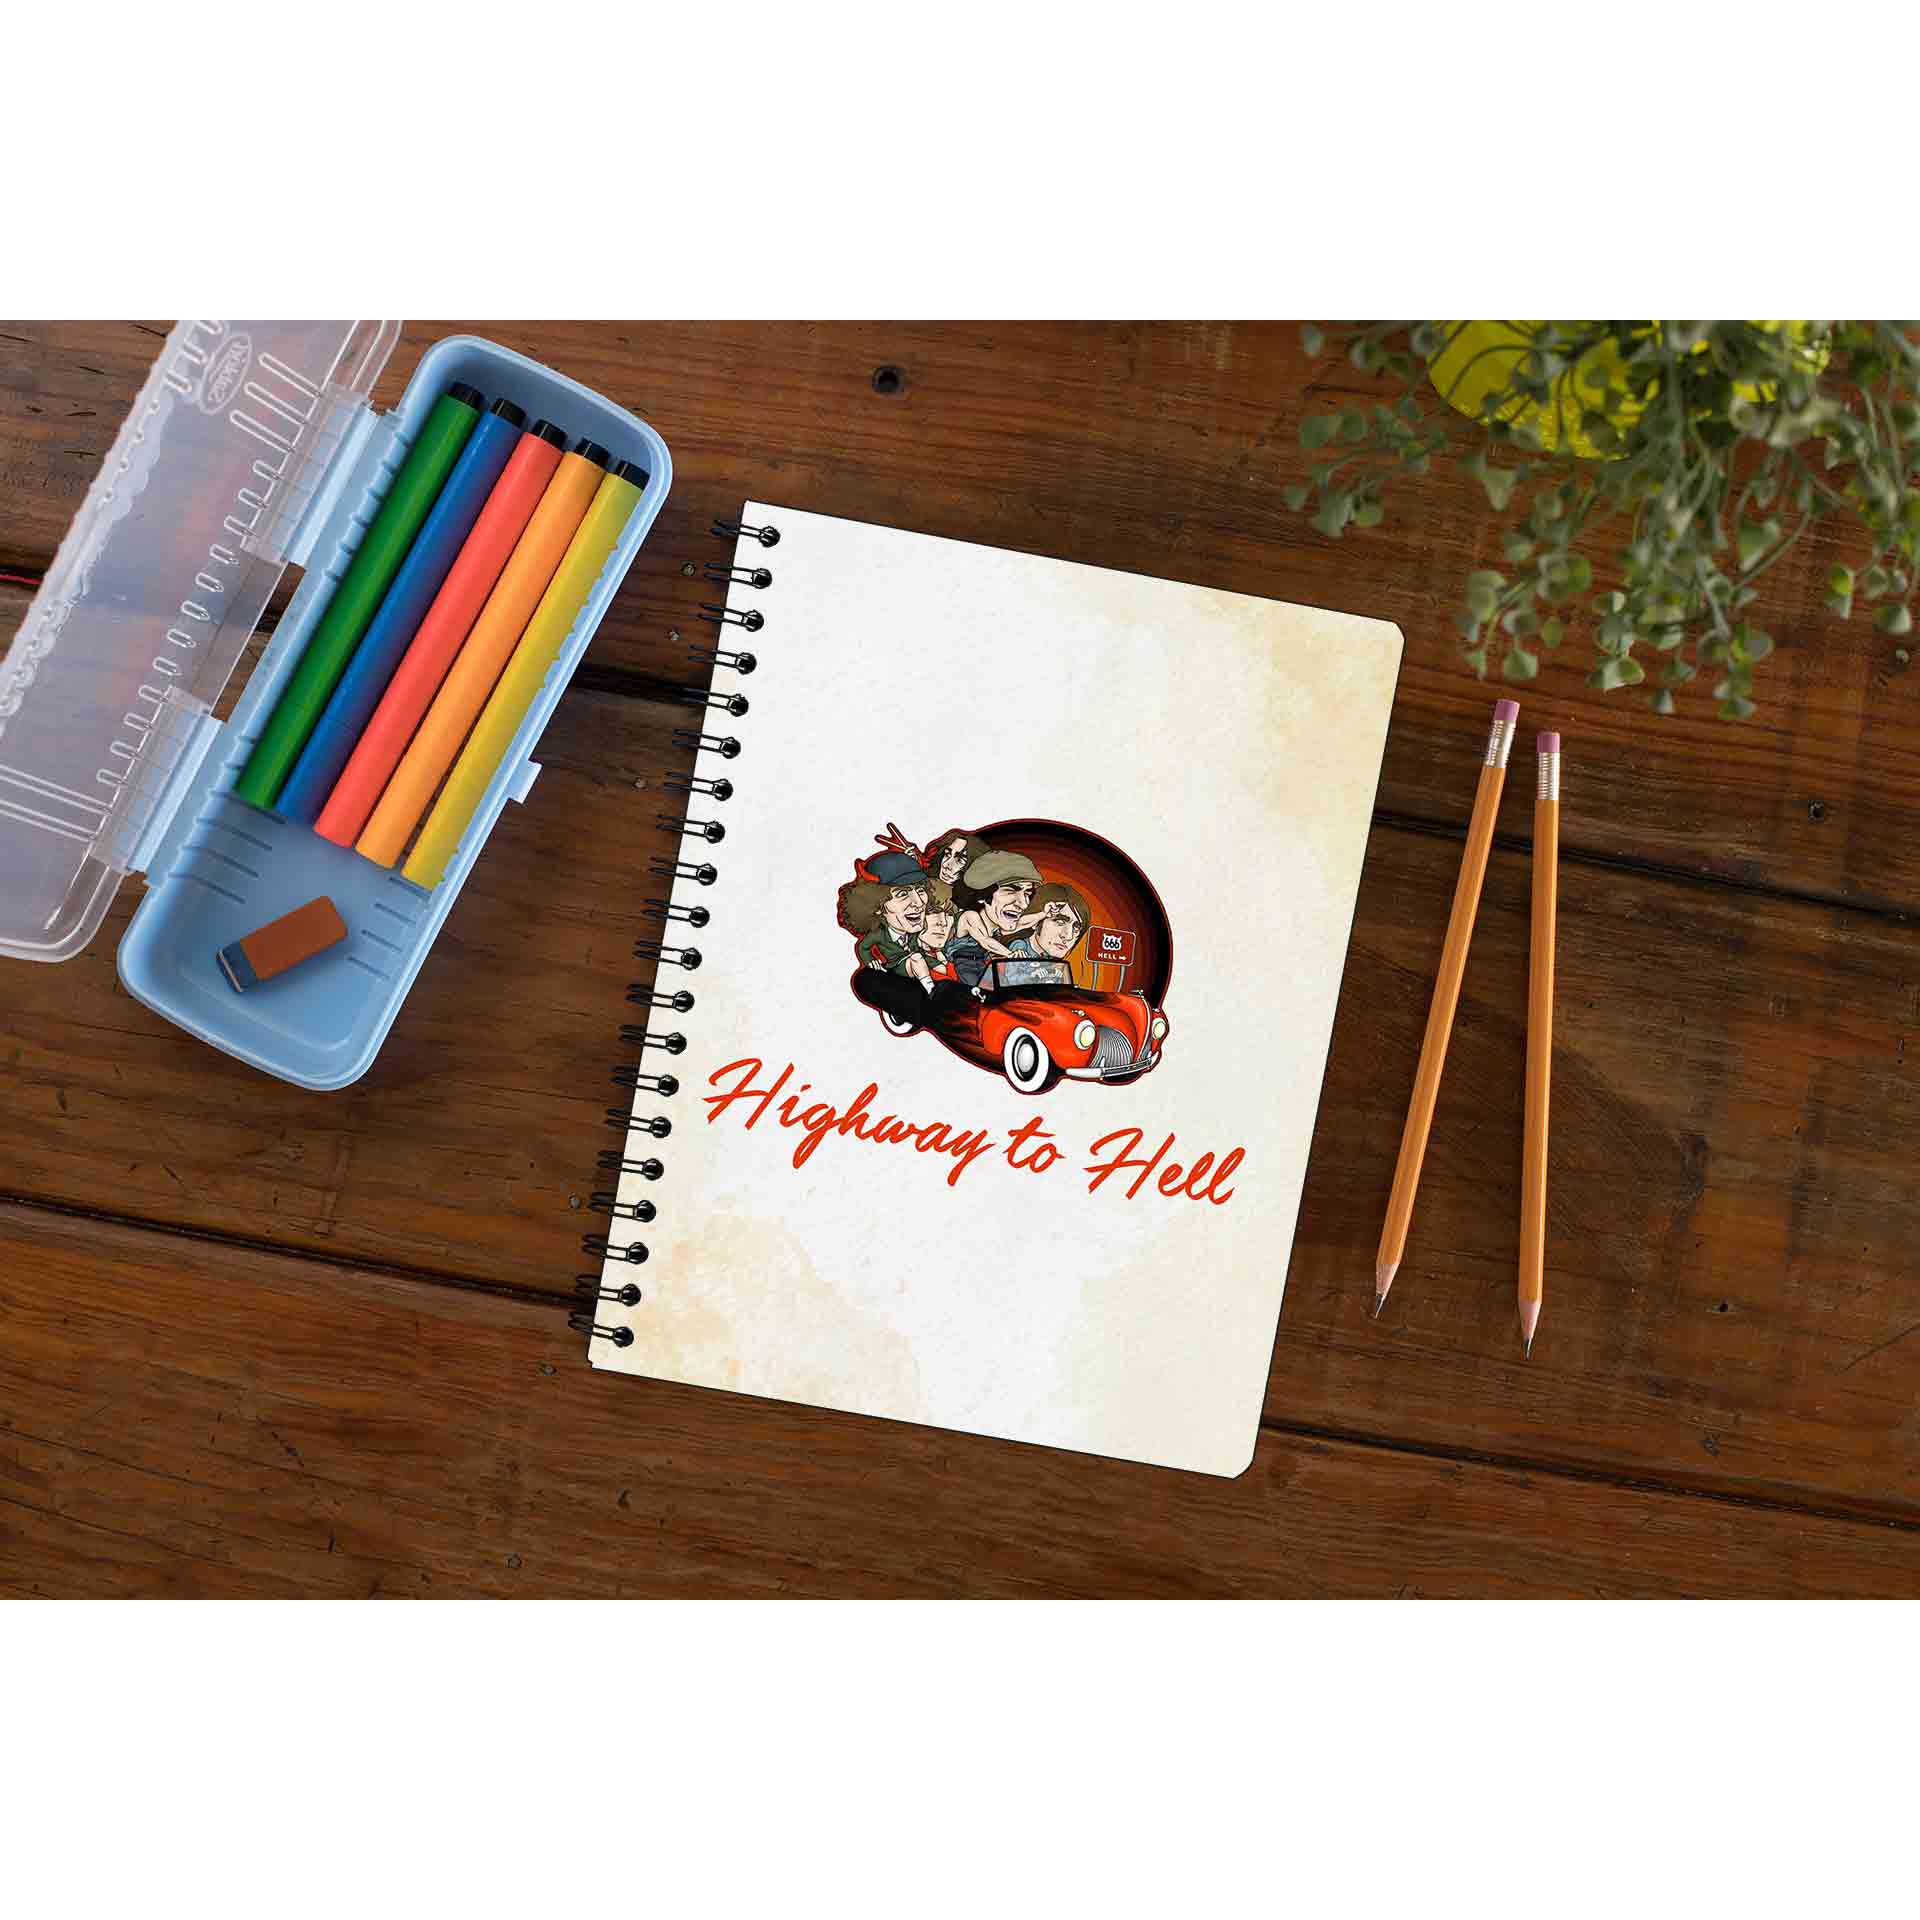 ac/dc highway to hell notebook notepad diary buy online india the banyan tee tbt unruled